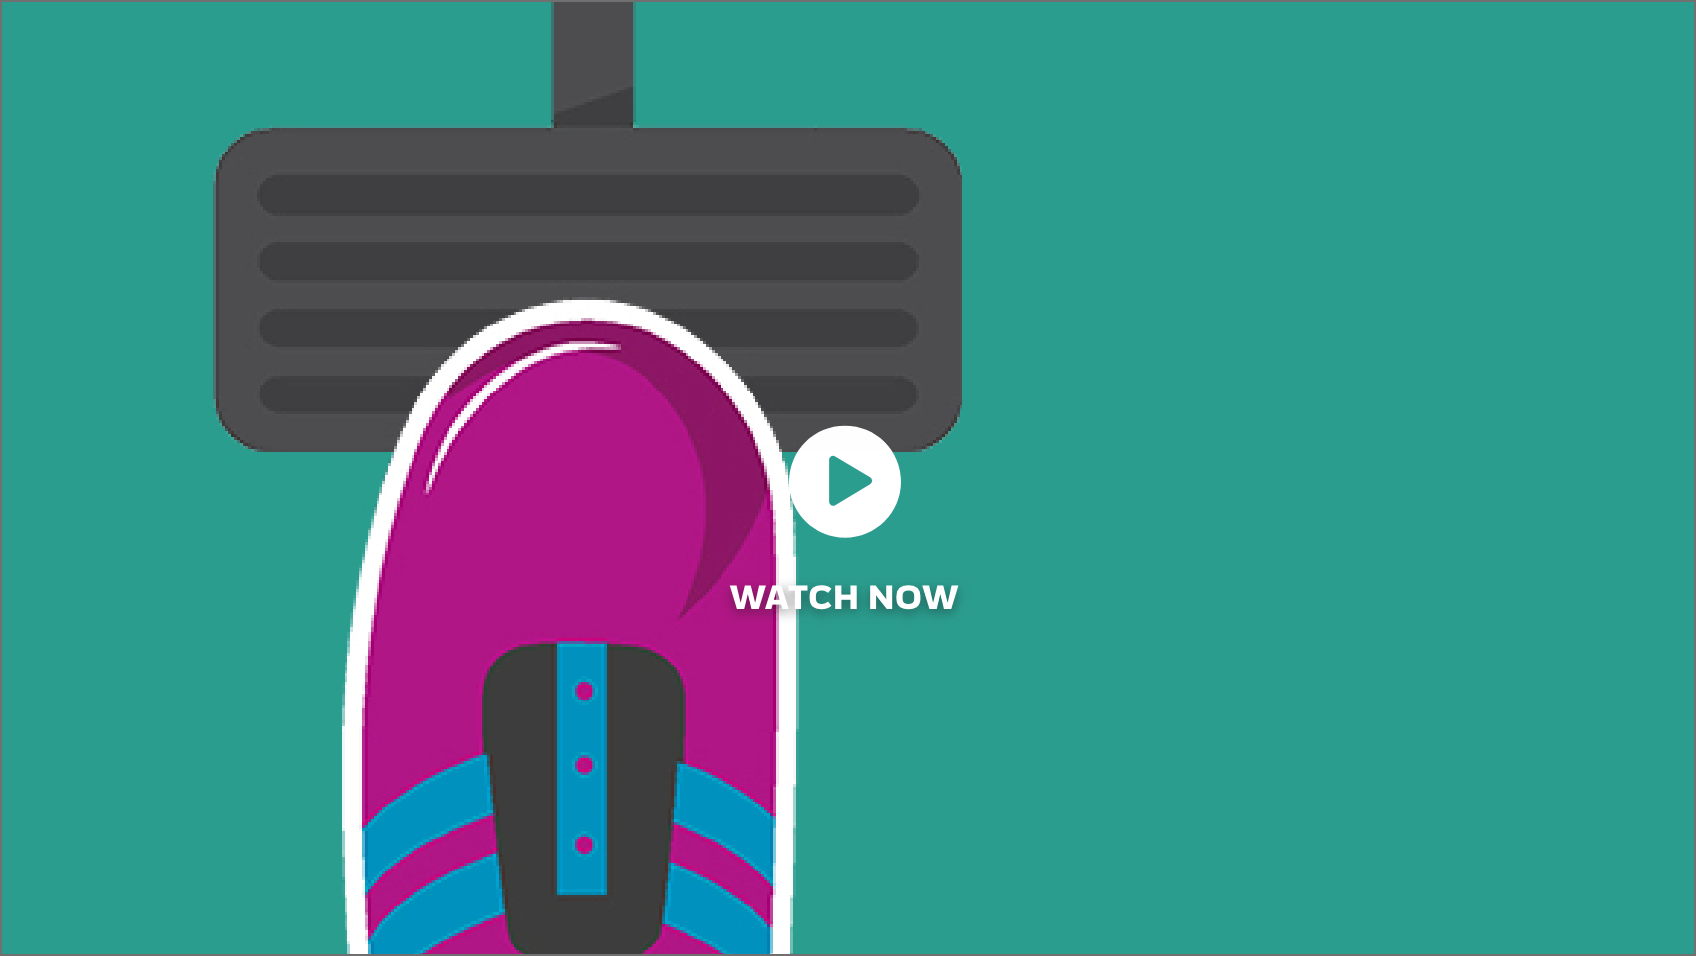 Thumbnail for the MOA video with the image of a foot pressing on a car’s brake pedal to represent the gas/brake MOA analogy and how NOURIANZ works to treat “off” time.